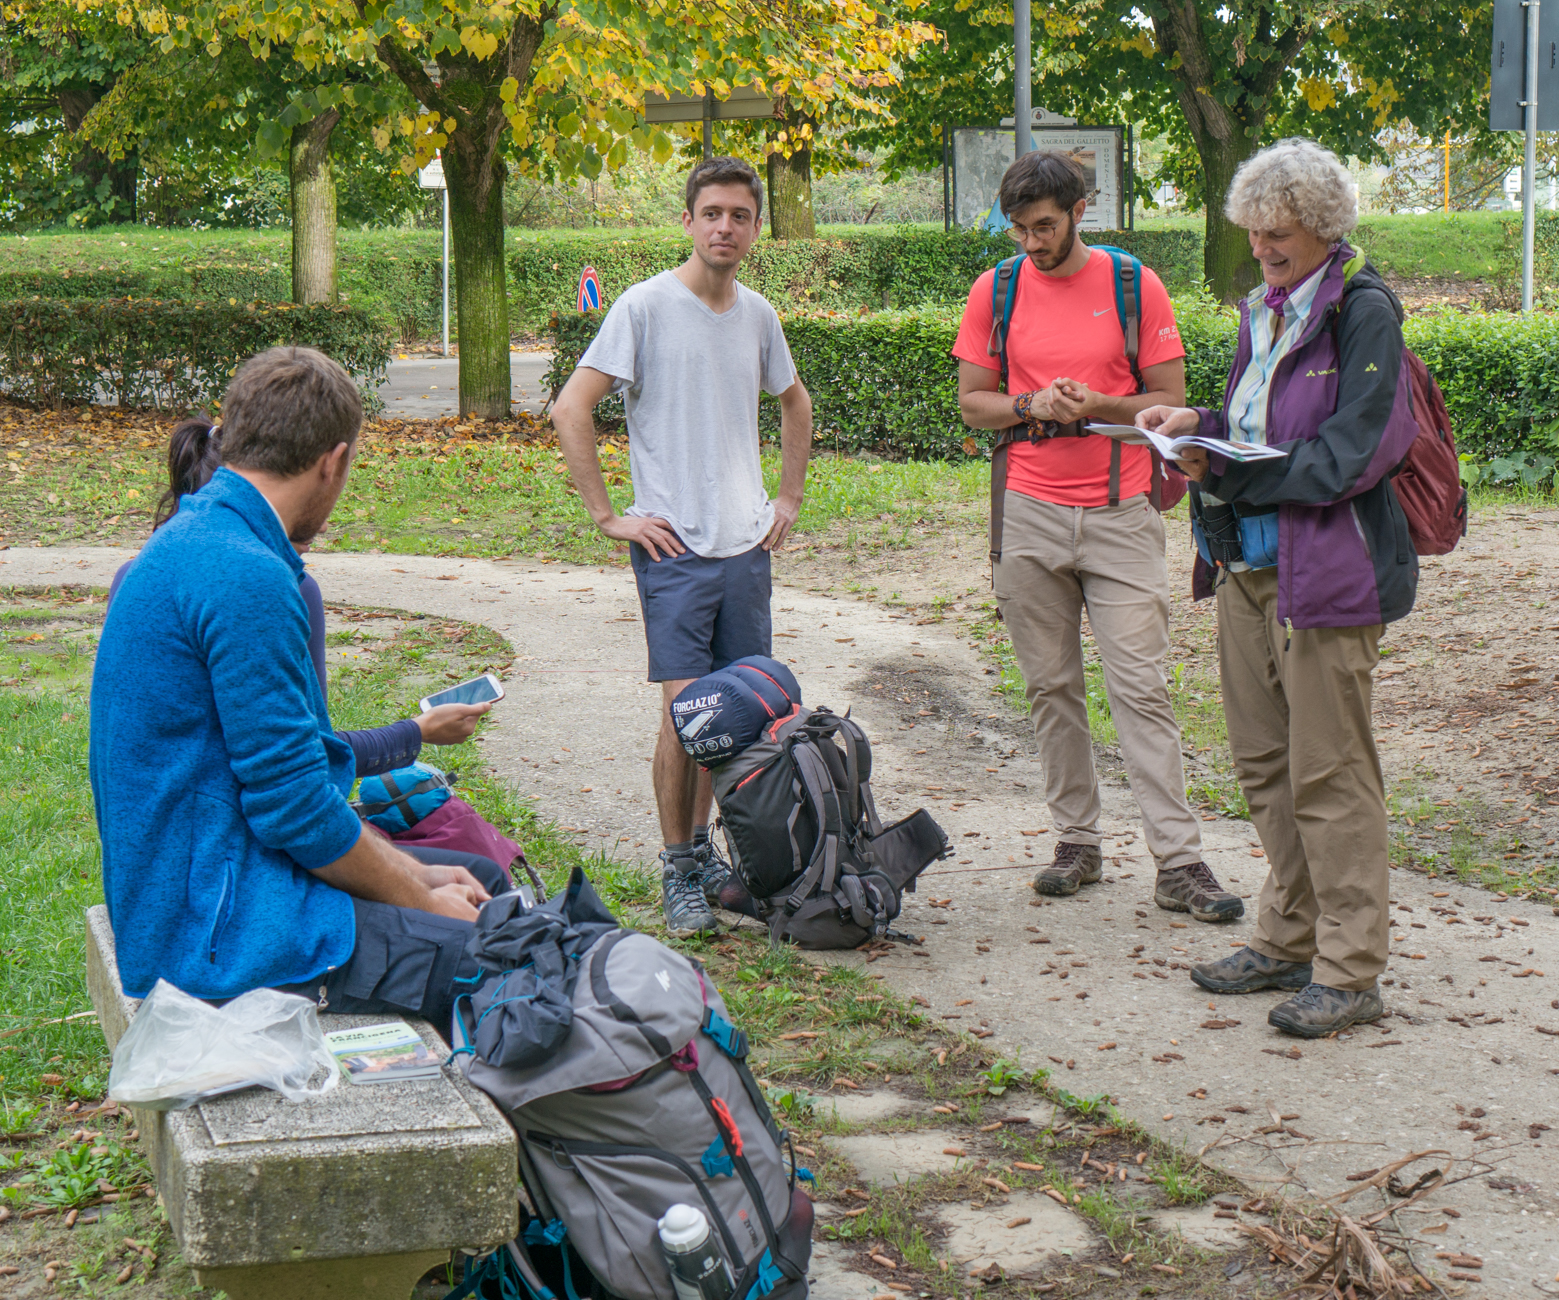 Pilgrims on the Via Francigena in Buoncovento, Italy, discuss the upcoming pilgrimage route | Photo by Mike Hudak